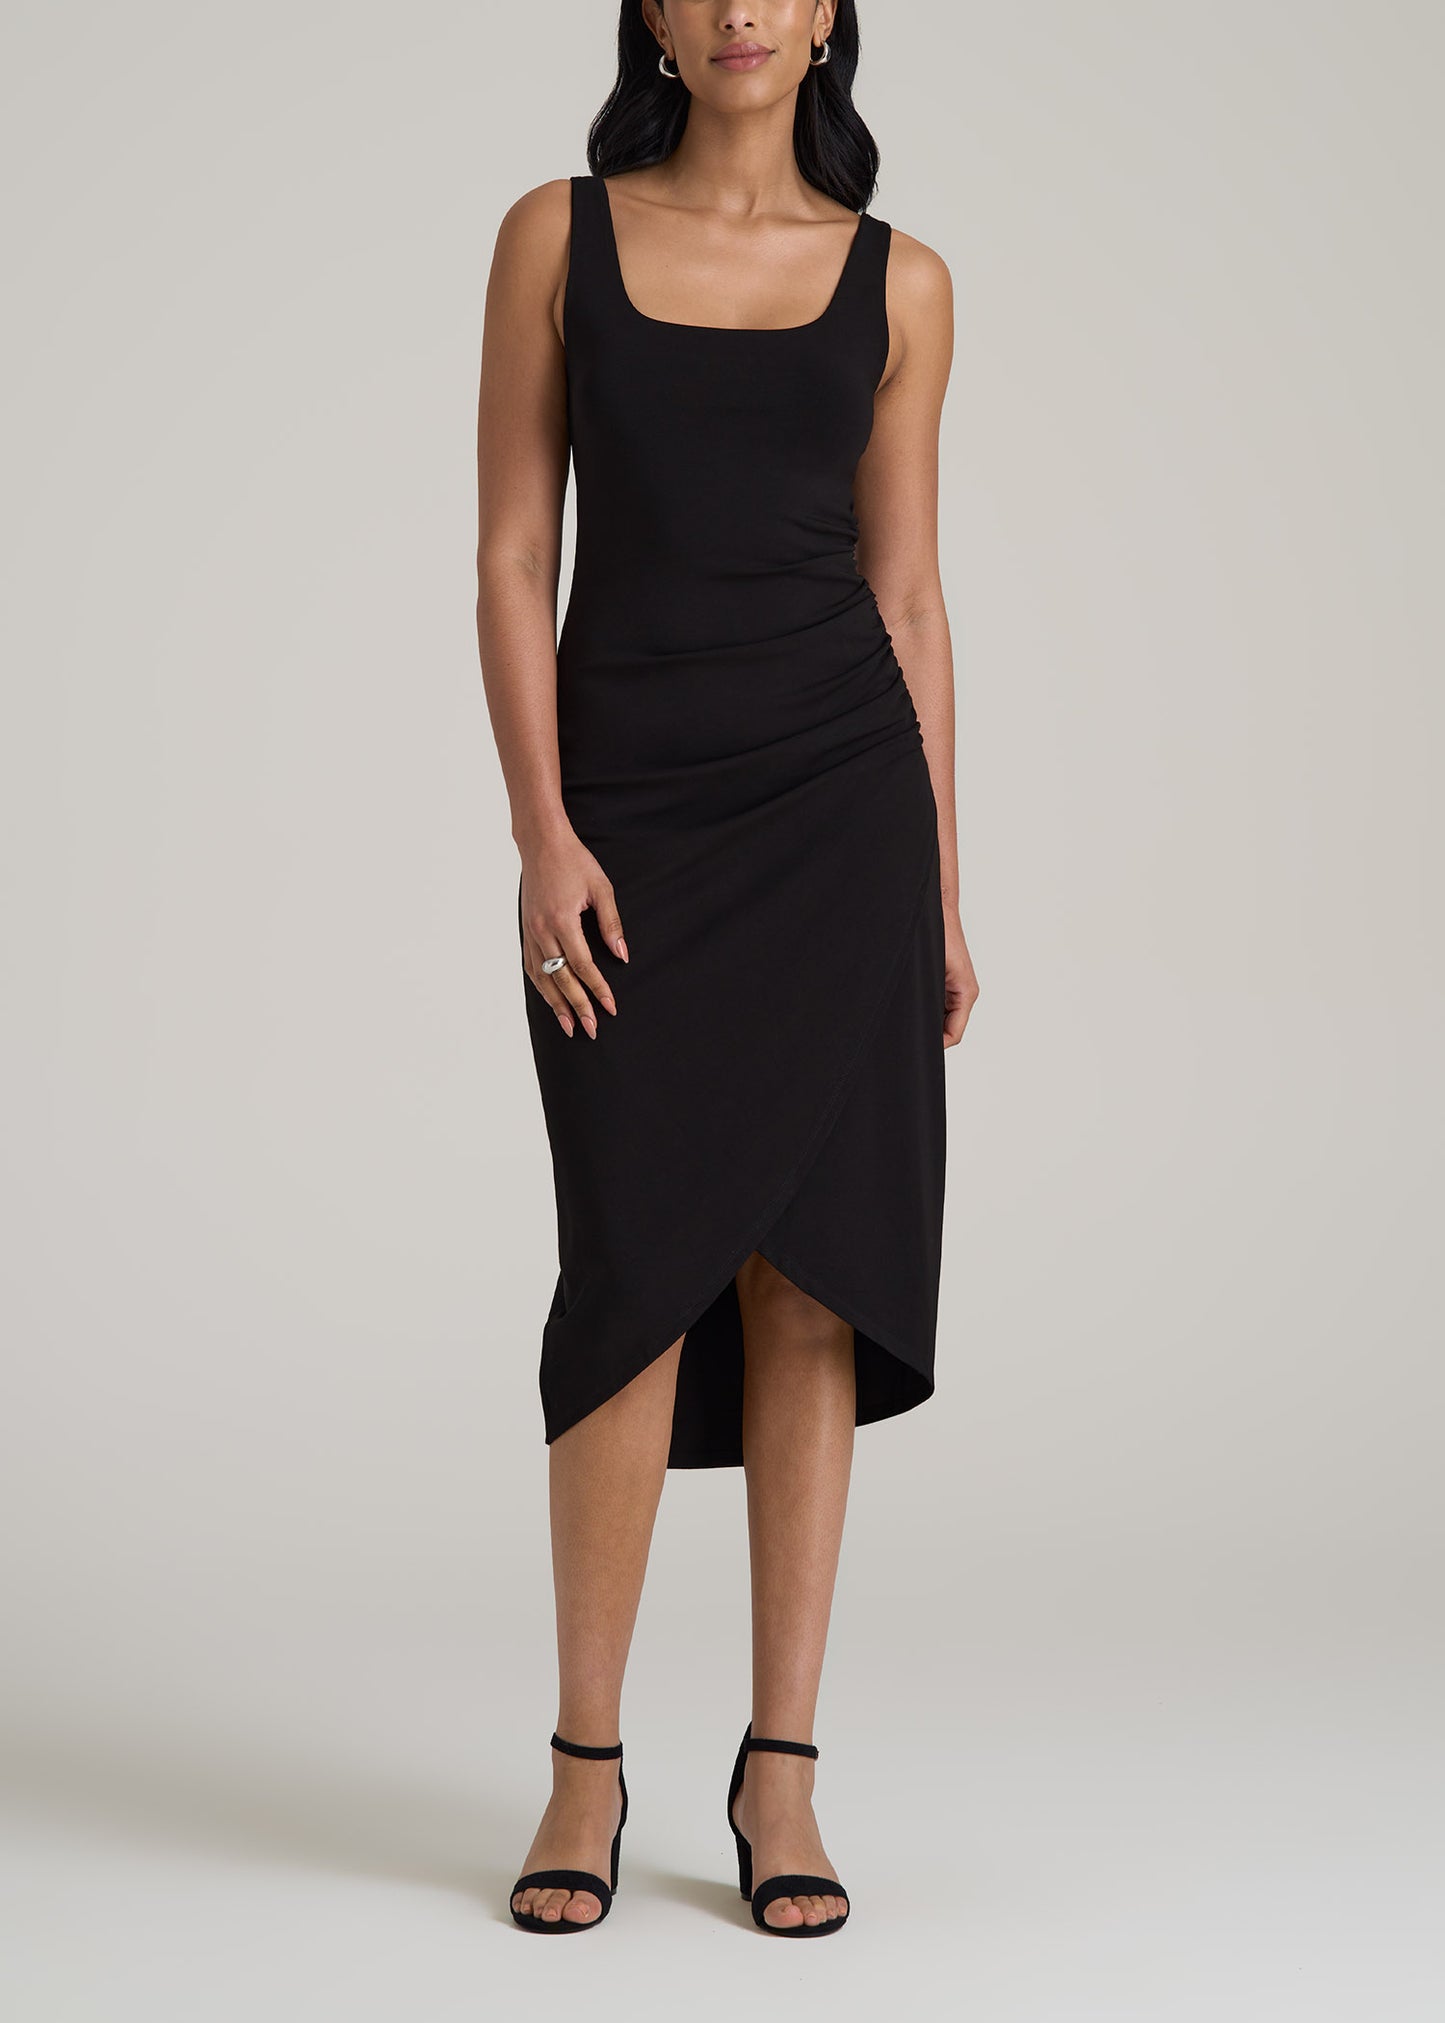 Squareneck Ruched Jersey Dress for Tall Women in Black